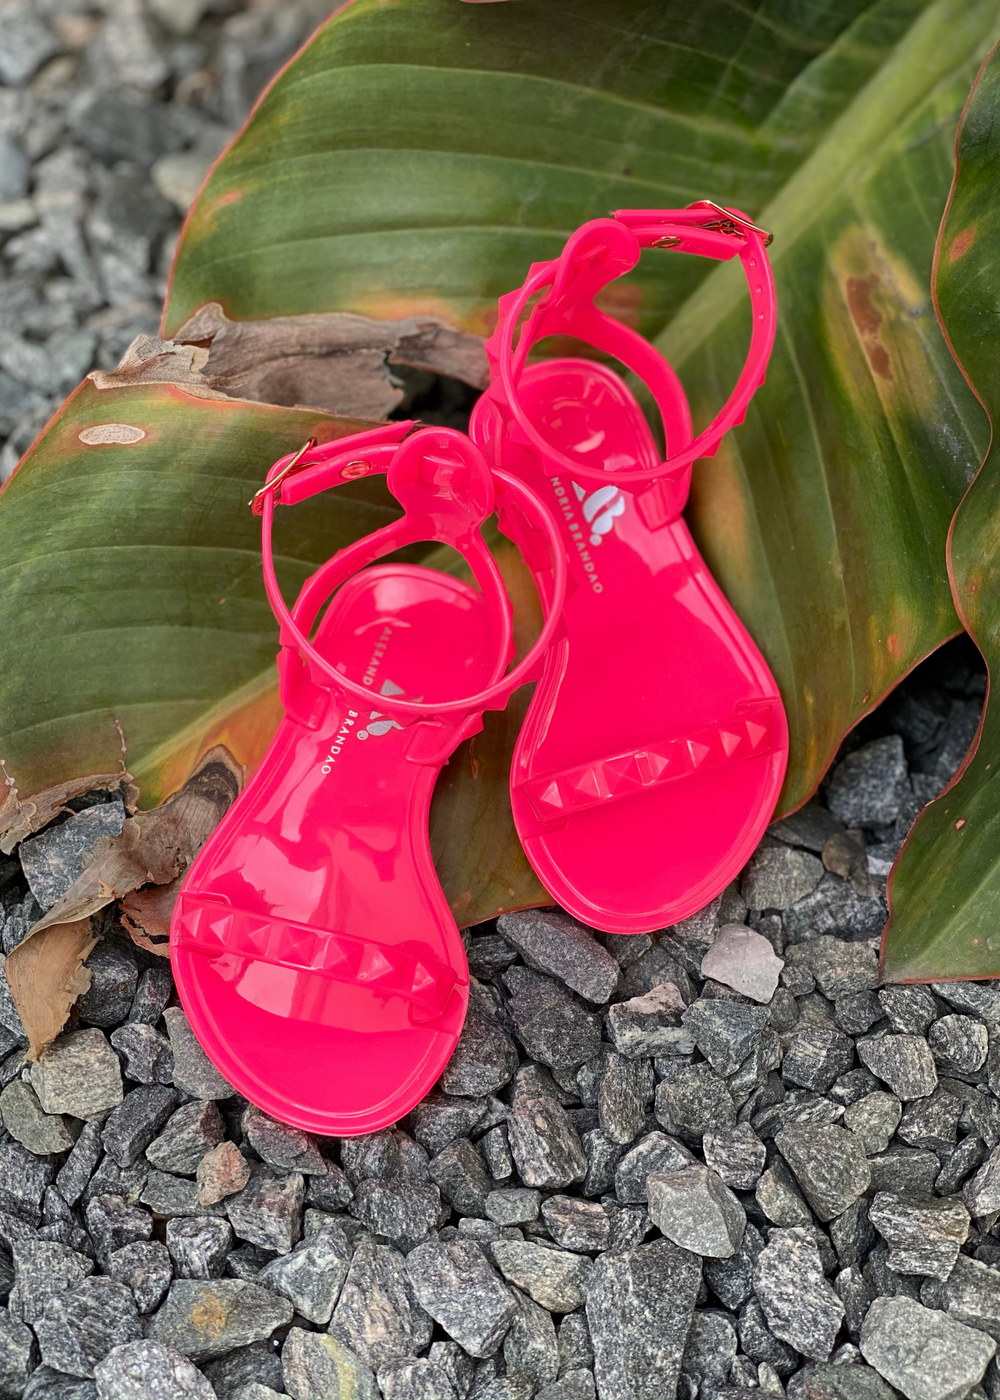 Aria Kids neon pink jelly sandals with thin strap across the toes and thin ankle strap.